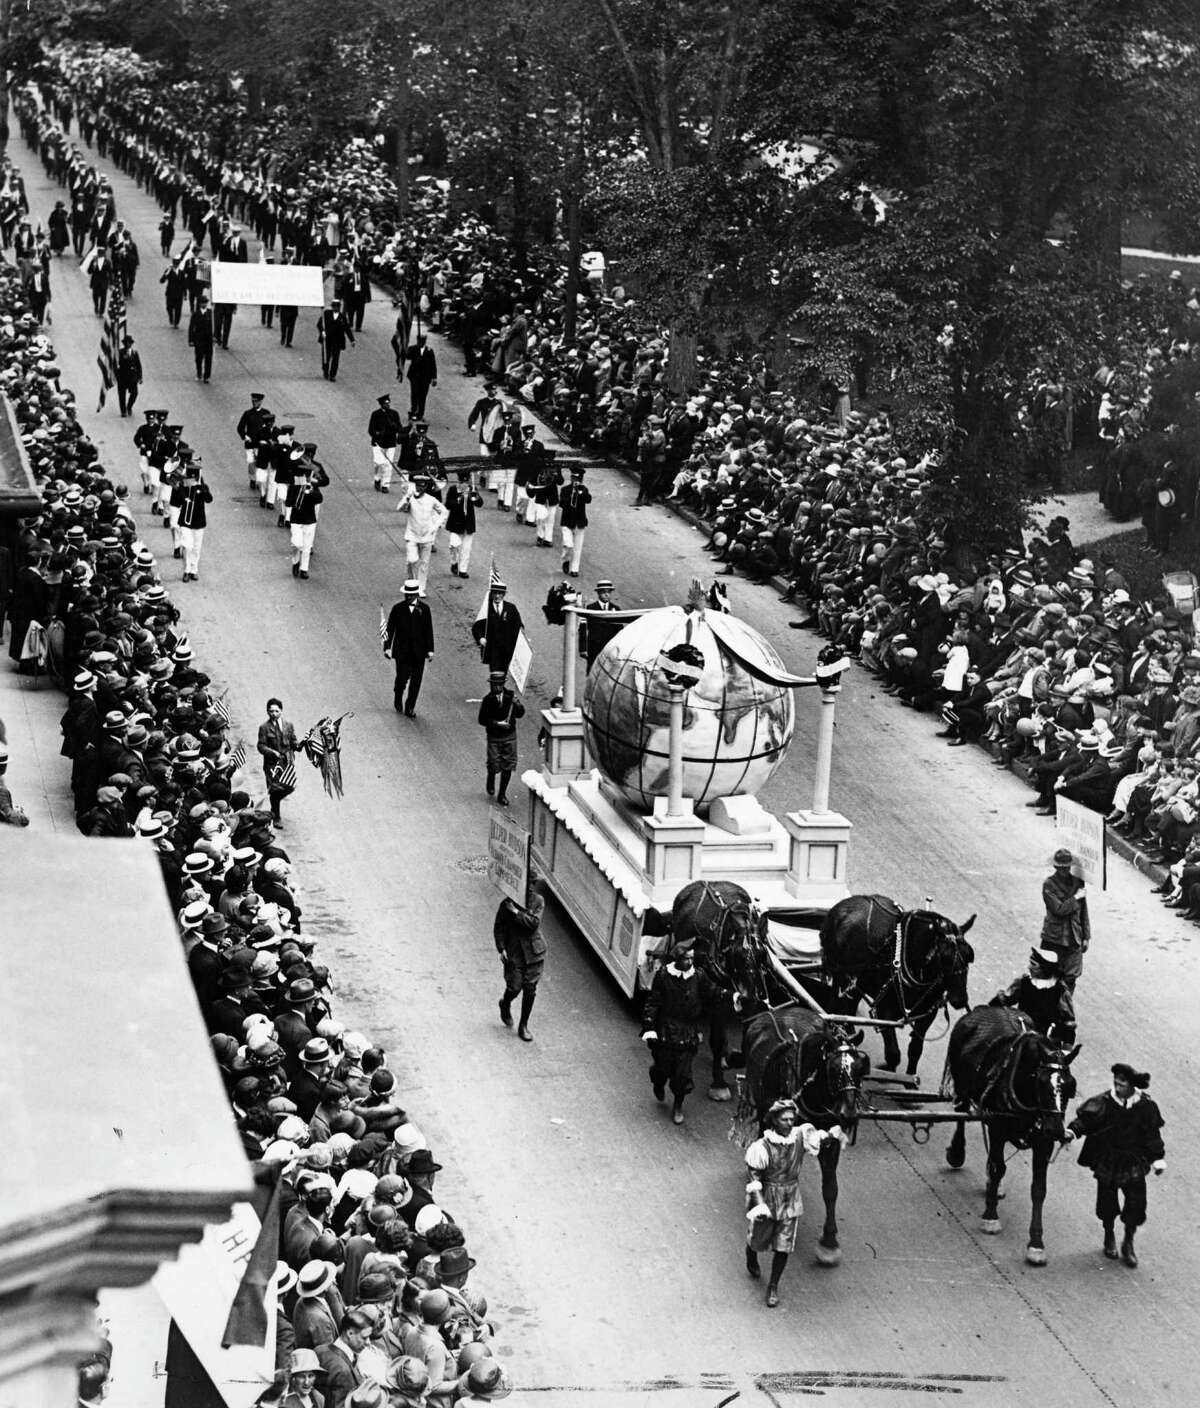 Albany tricentennial parade Tuesday, June 3, 1924, in Albany, N.Y. The celebration commemorated the 300th anniversary of the settlement of Albany in 1624 with the creation of Fort Orange. 15,000 people, 60 floats and 30 bands marched through the city. (Times Union Archive)